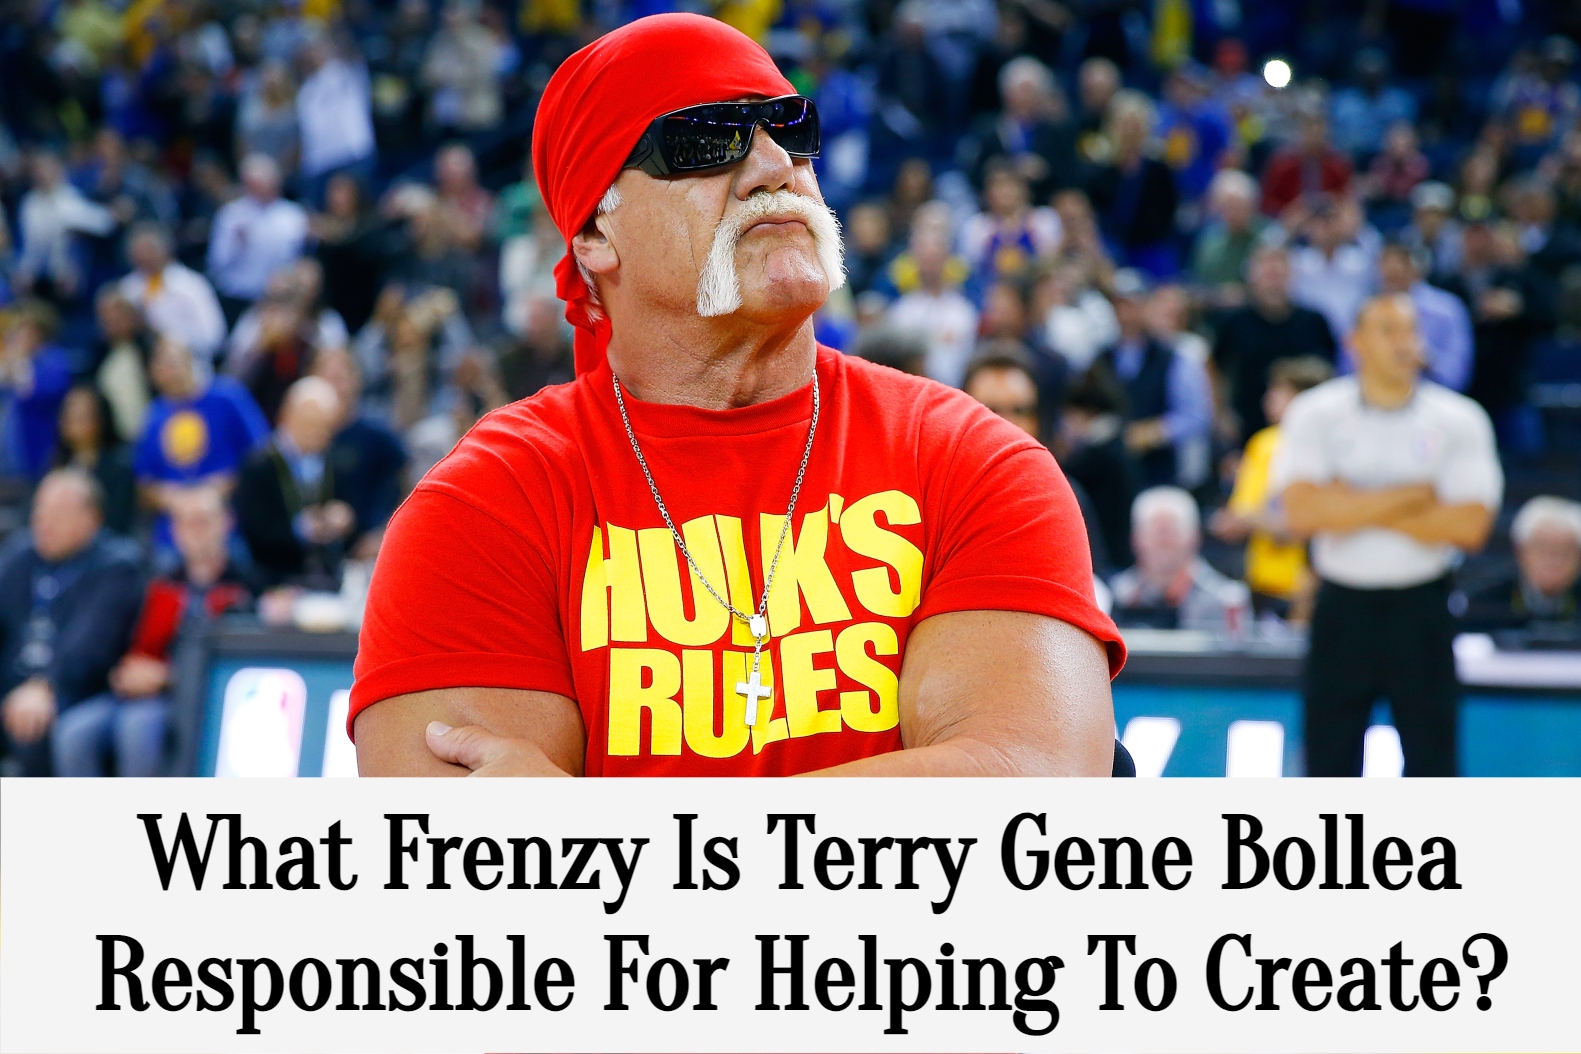 What Frenzy Is Terry Gene Bollea Responsible For Helping To Create?